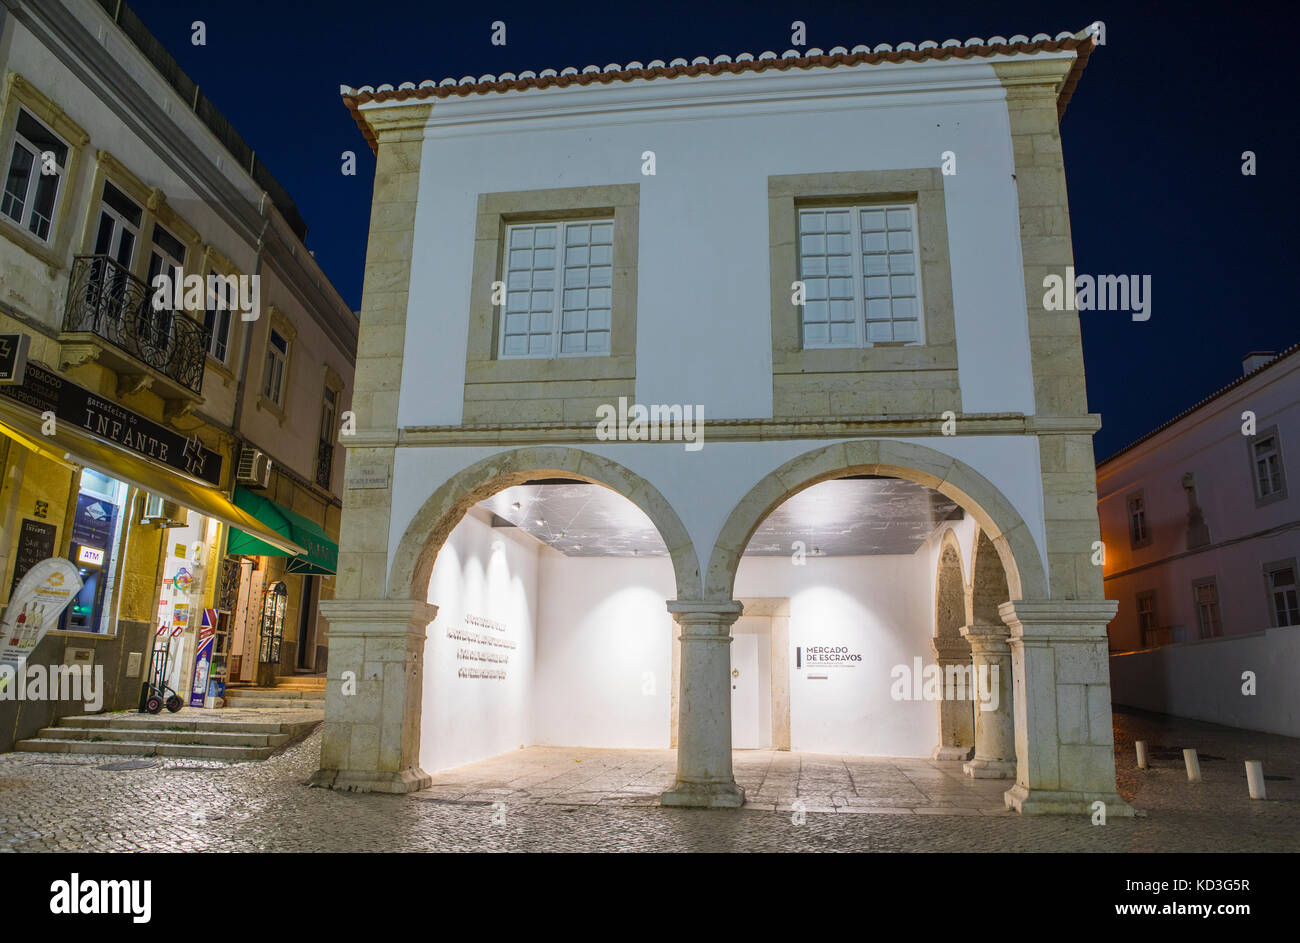 LAGOS, PORTUGAL - SEPTEMBER 15TH 2017: A dusk-time view of the Mercado De Escravos - the Slave Market Museum, located in the historic old town of Lago Stock Photo